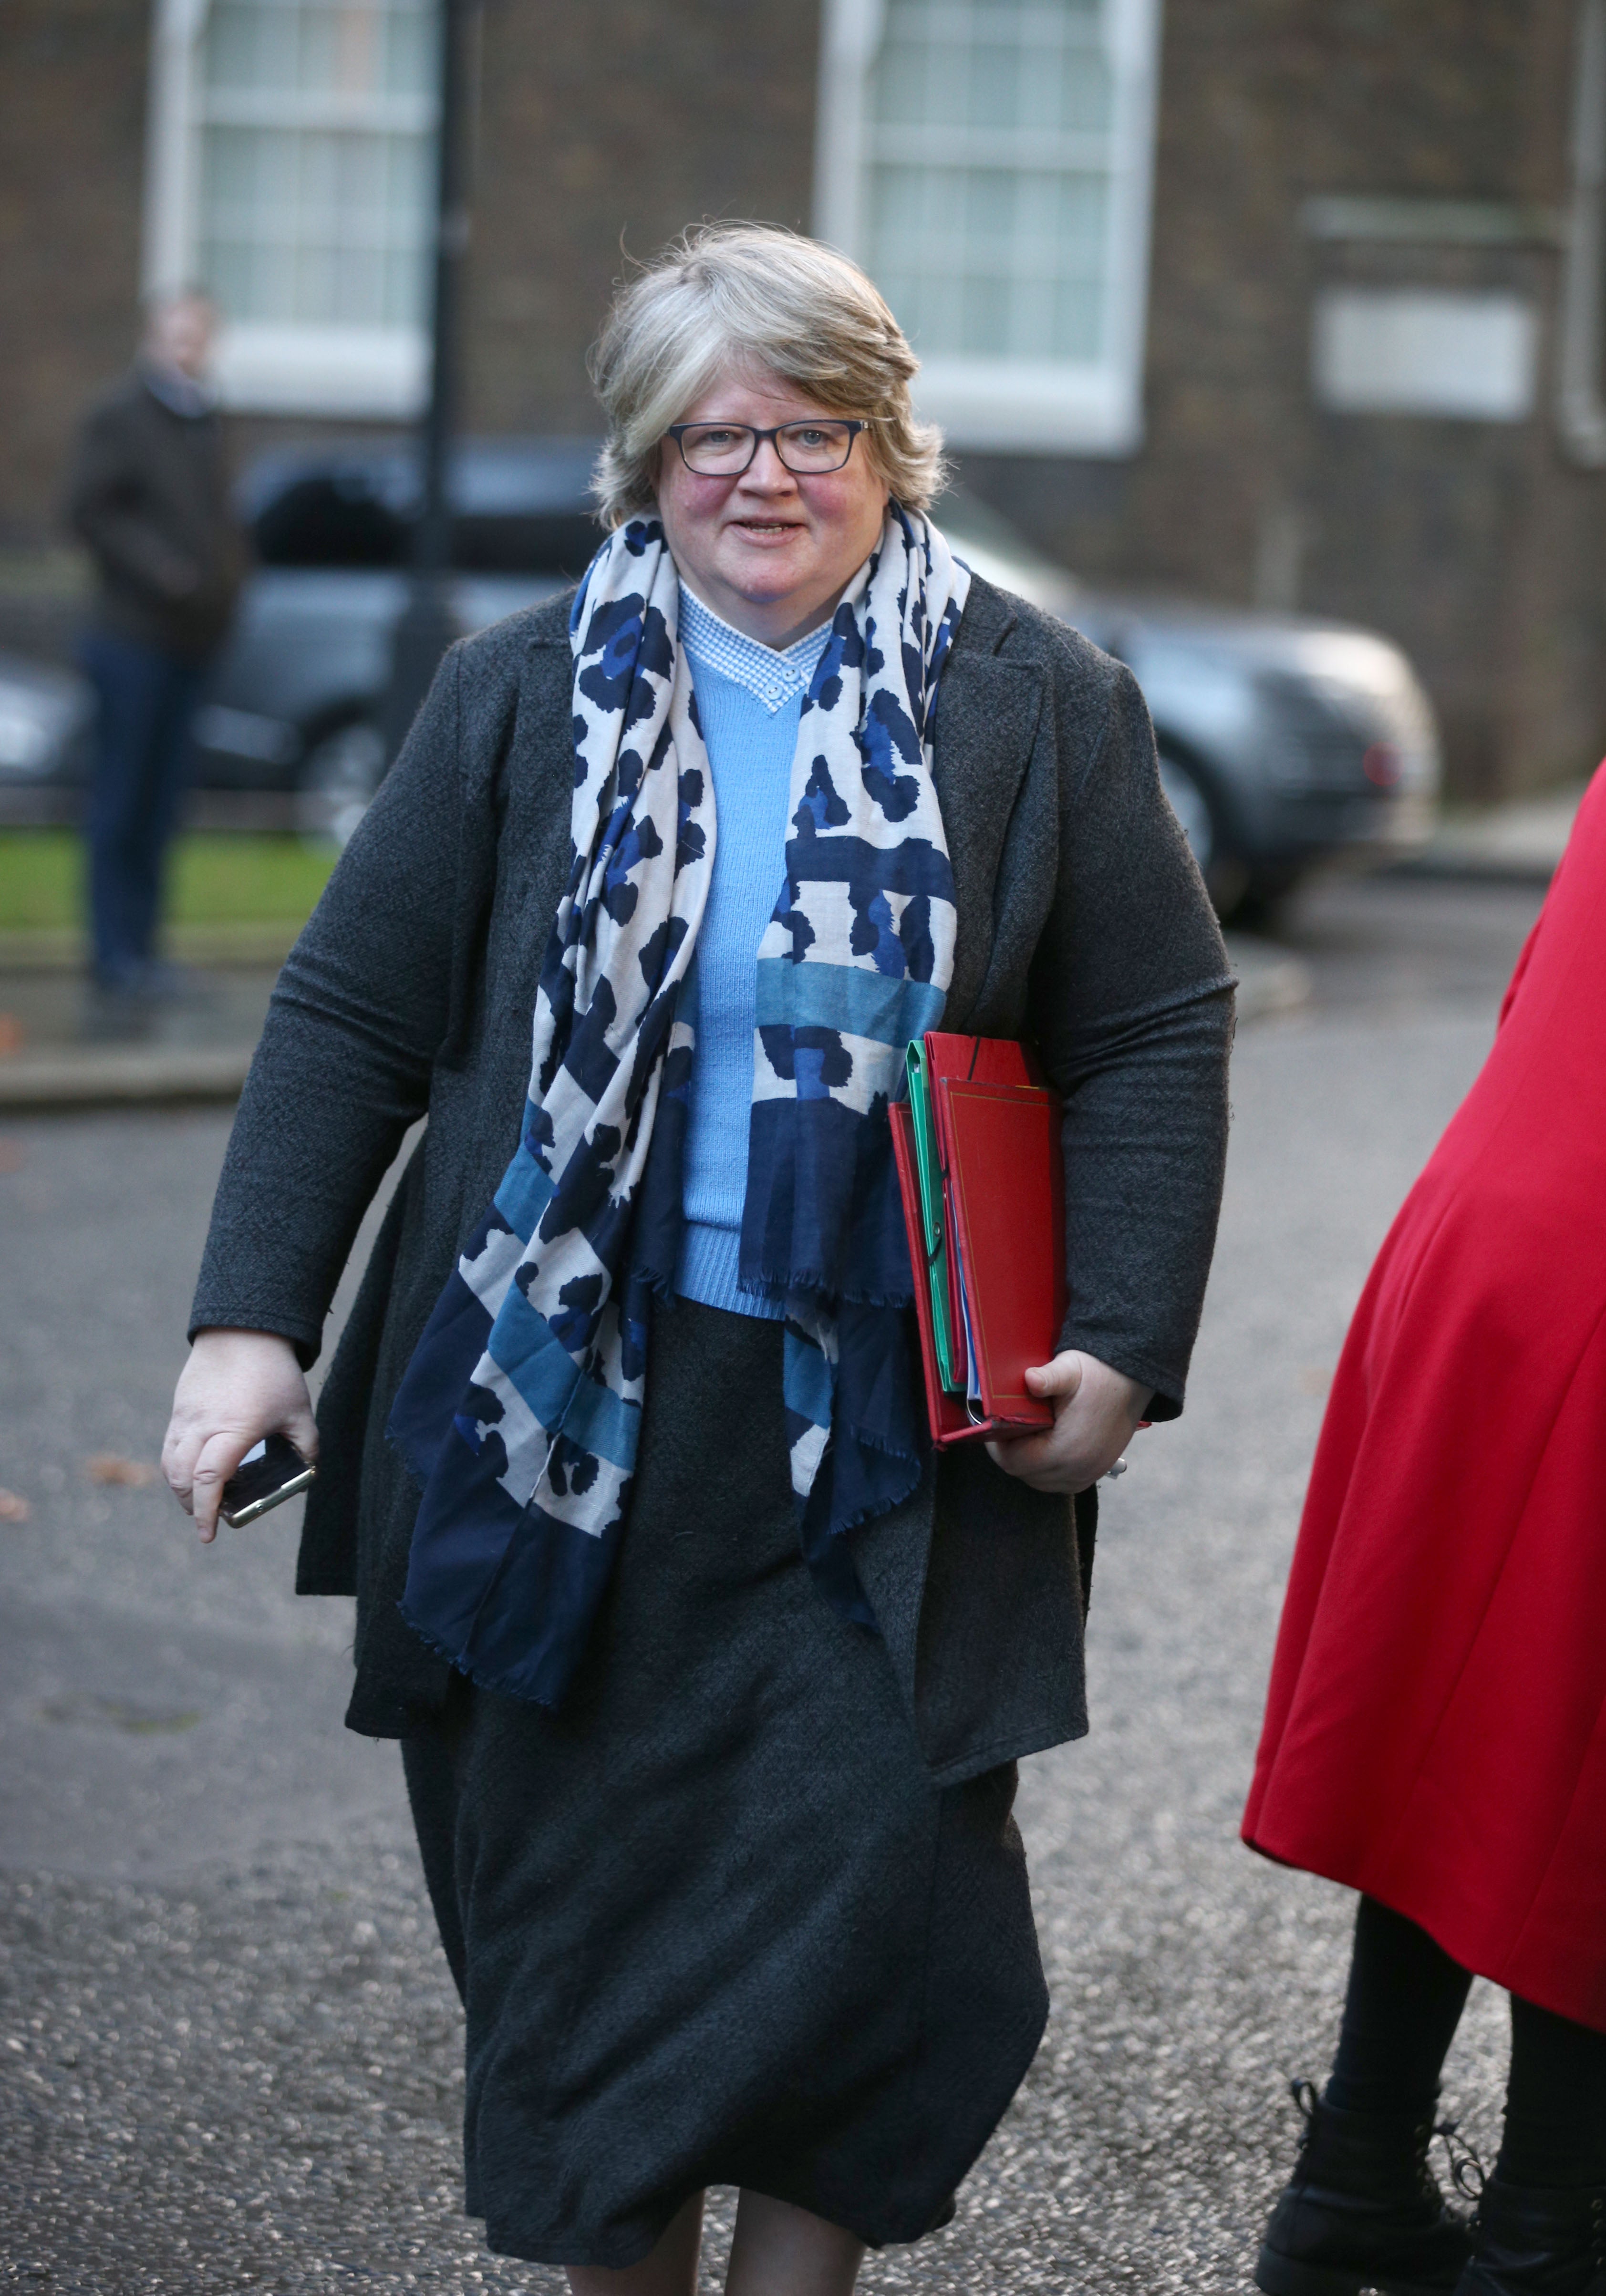 Works and Pensions Secretary Therese Coffey has been accused of getting her figures on Universal Credit wrong (Yui Mok/PA)